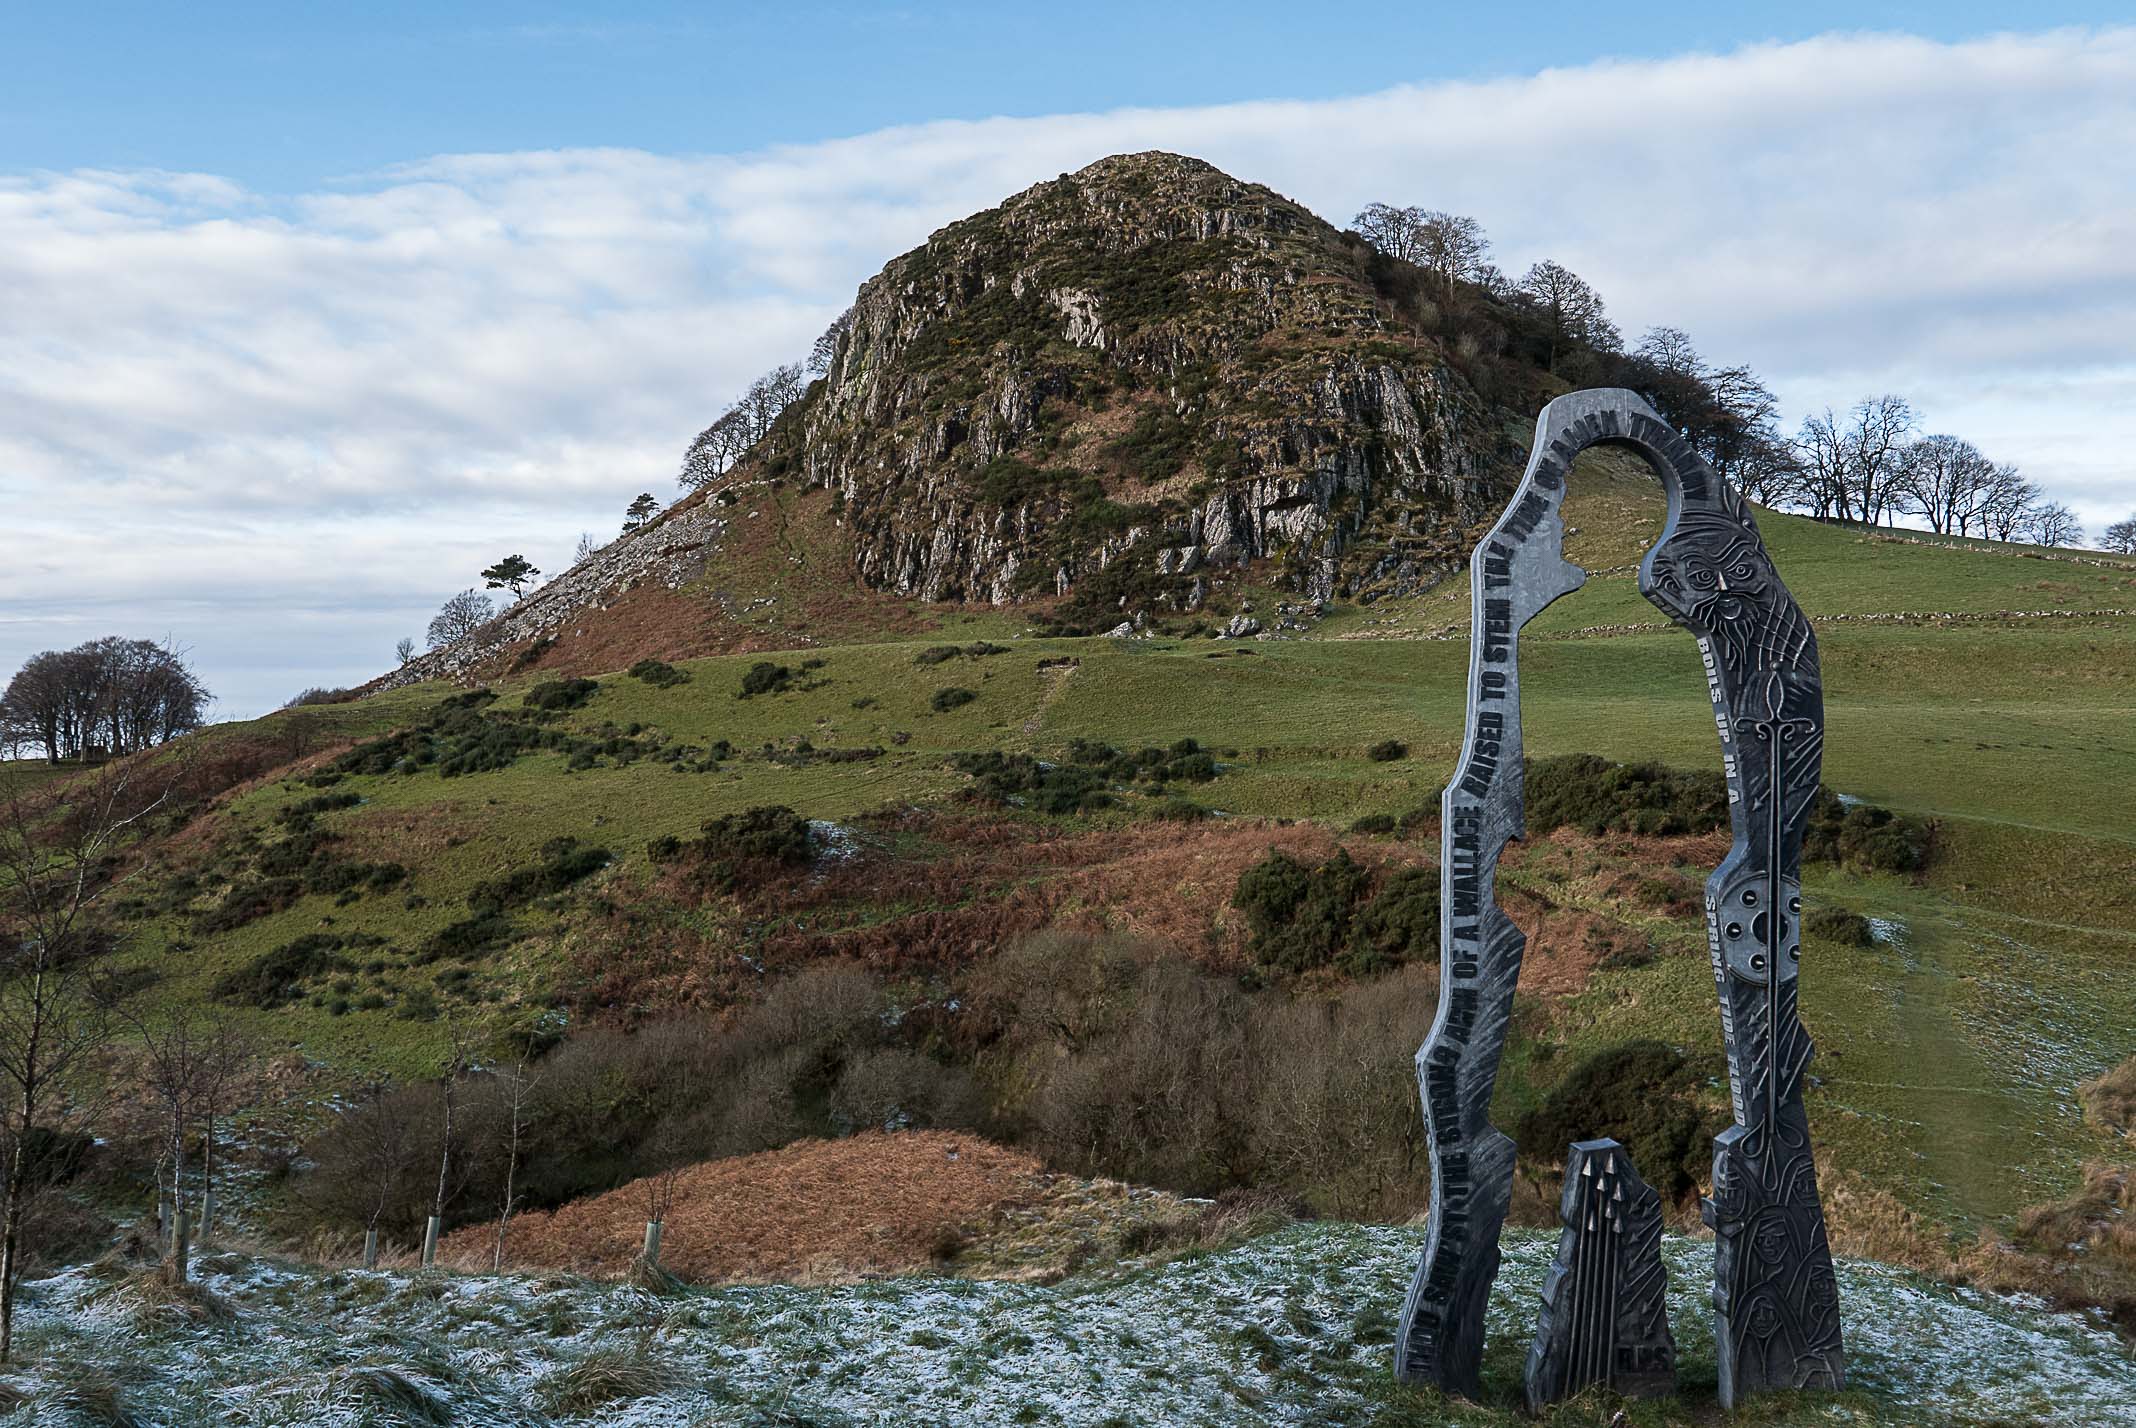 Spirit of Scotland statue with Loudoun Hill in the background